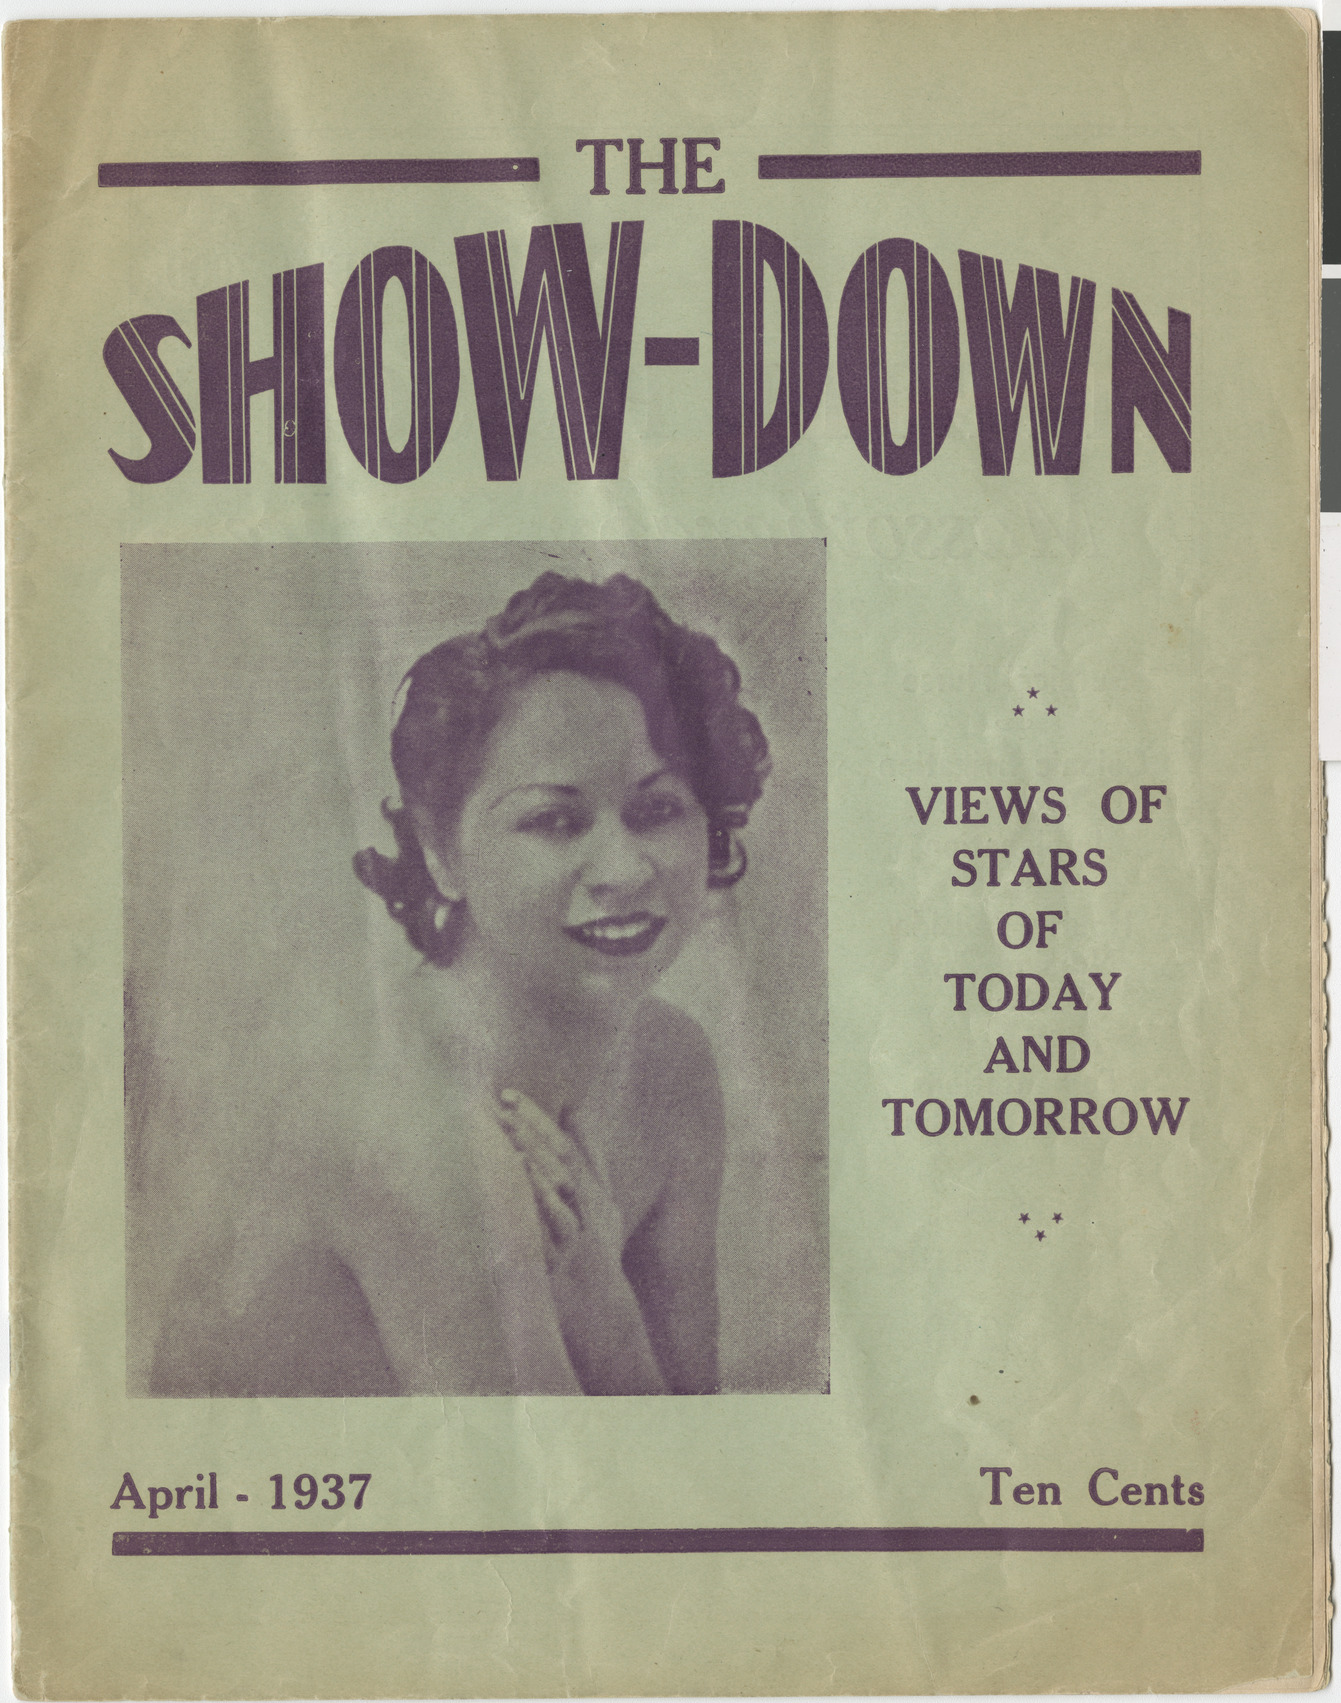 The Show-Down: Views of Stars of Today and Tomorrow, publication, April 1937